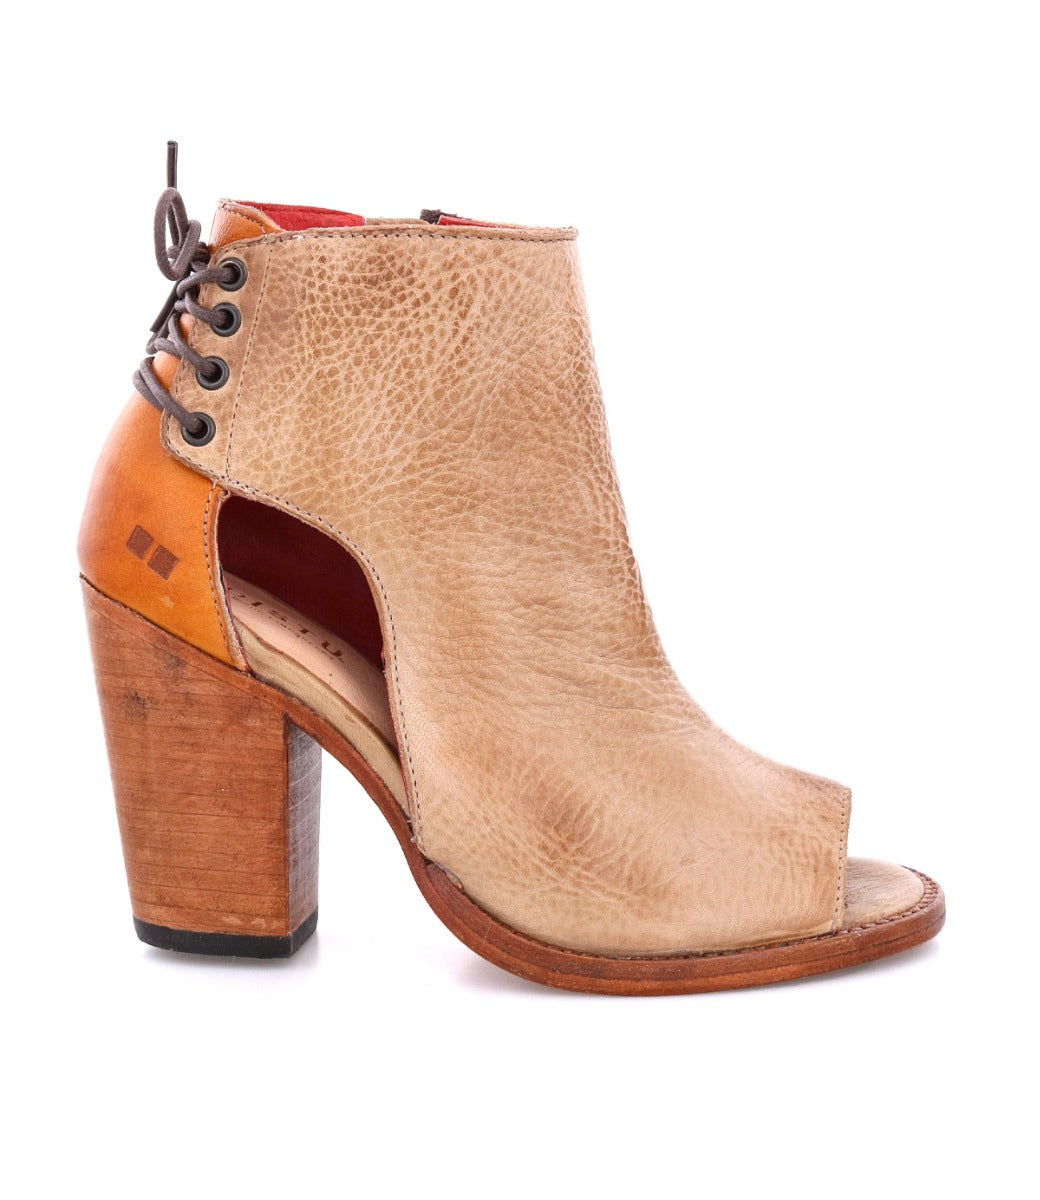 An Angelique women's ankle boot with a wooden heel by Bed Stu.